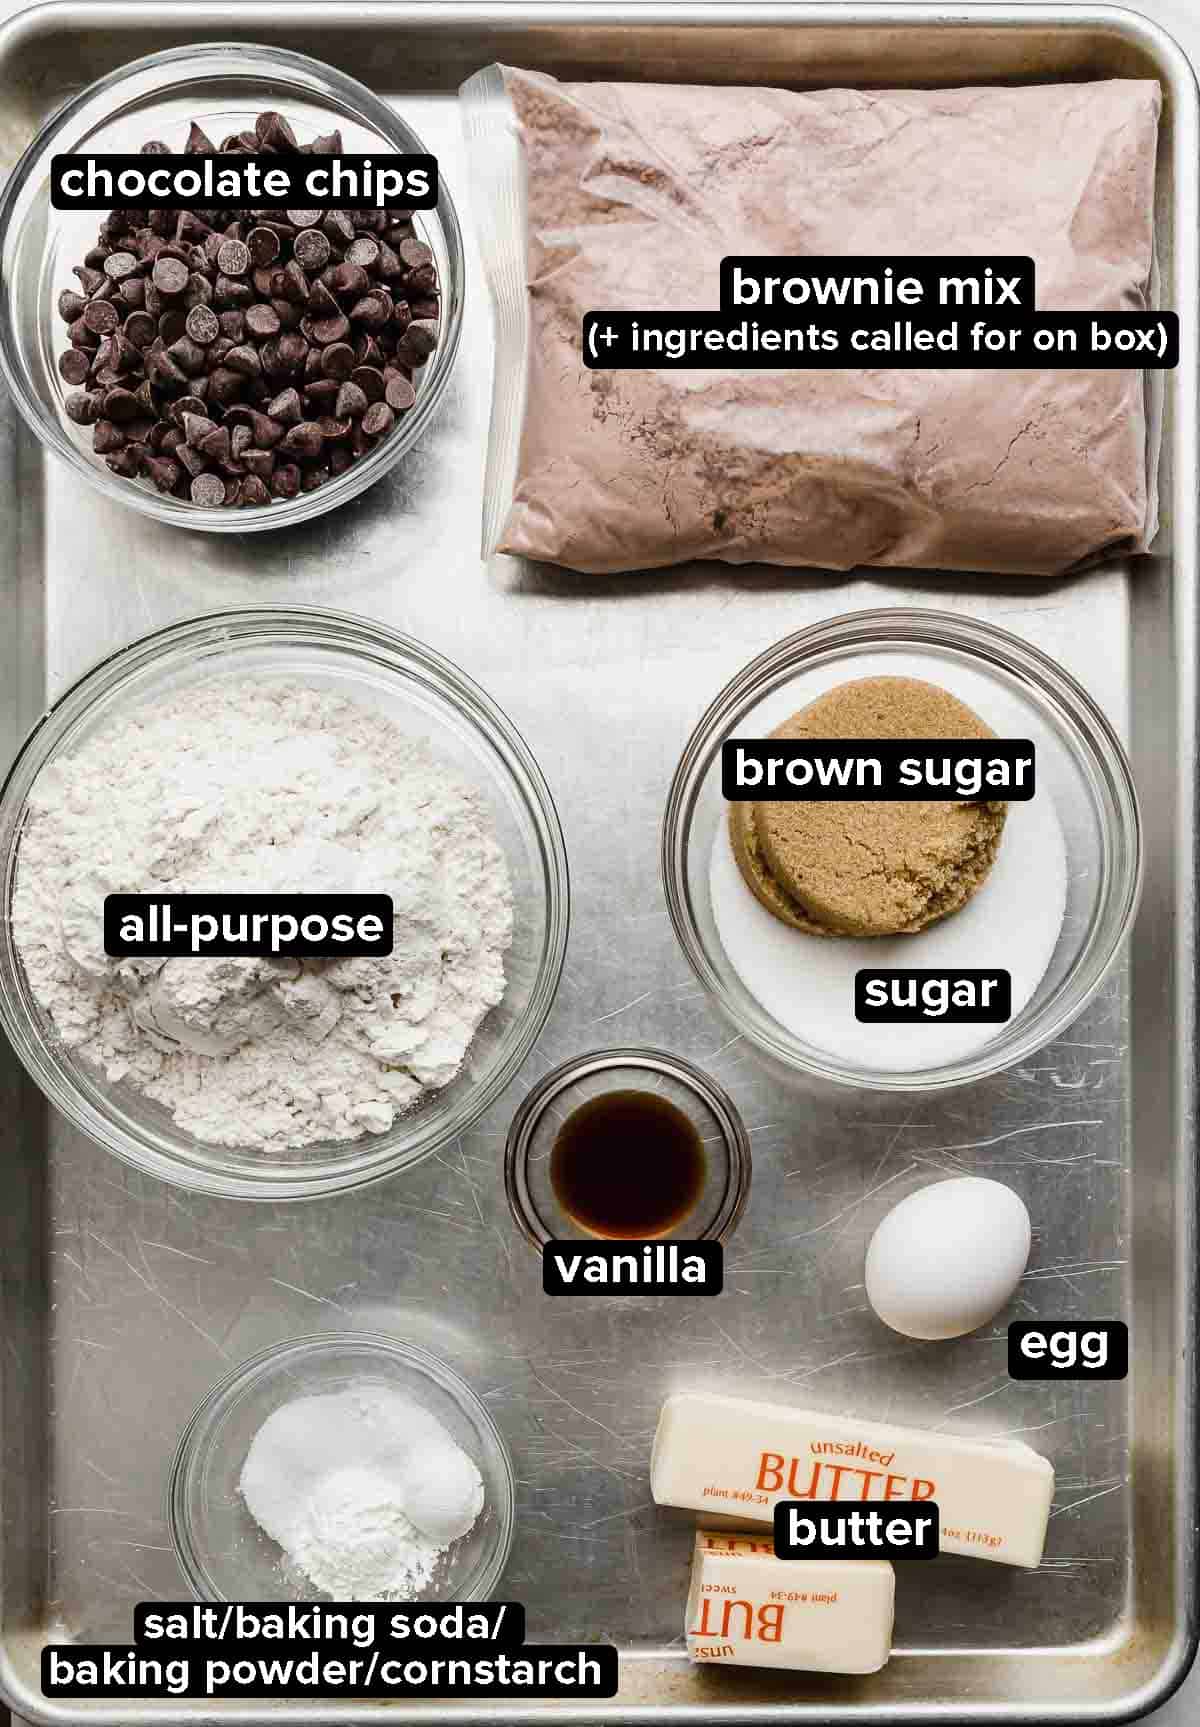 Brookies ingredients on a silver baking sheet: brownie mix, chocolate chips, flour, sugar, butter, leavening and egg.